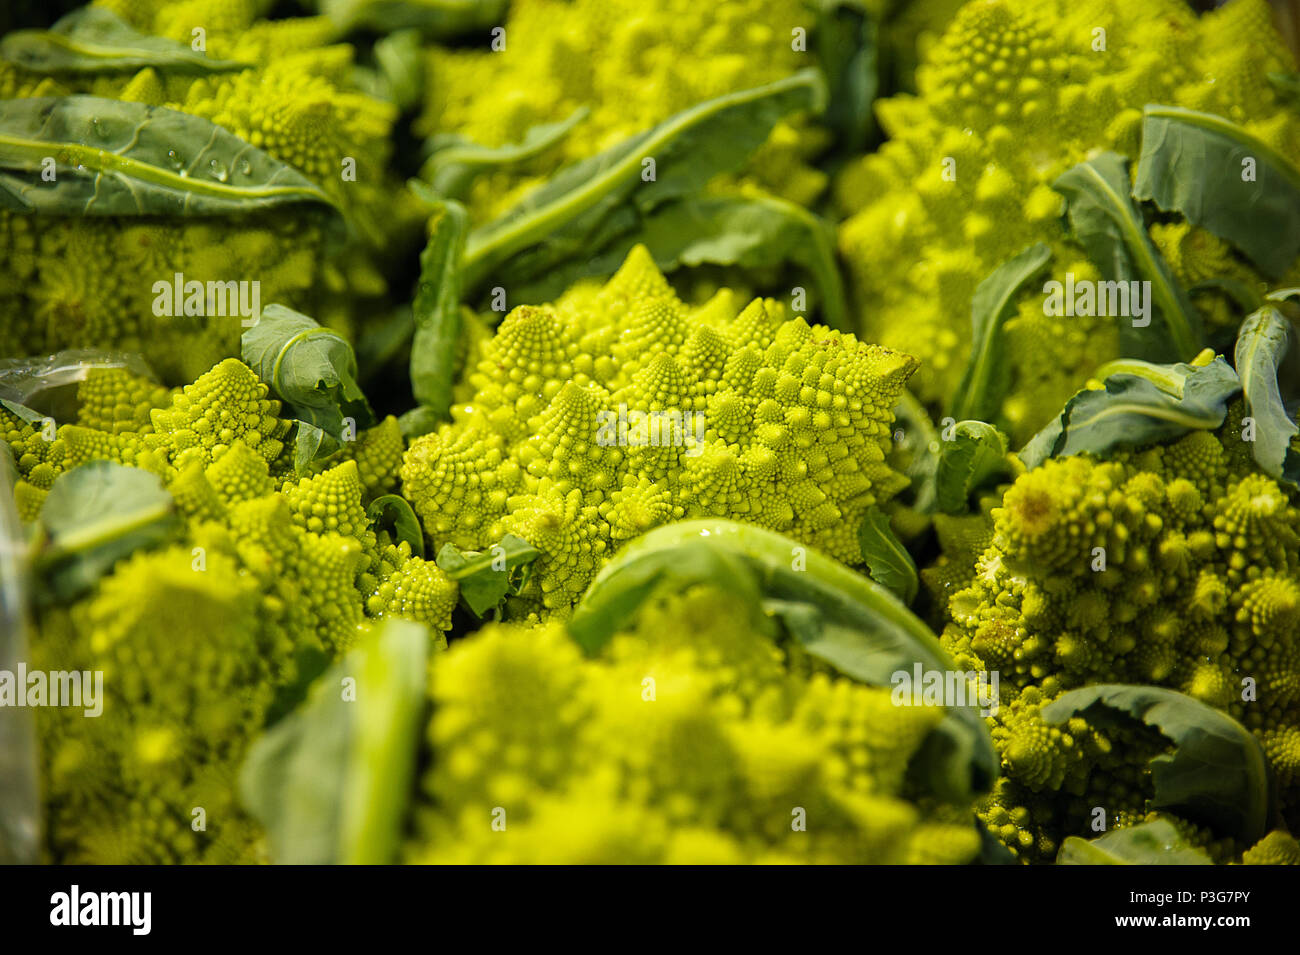 Horizontal shot of beautiful and unusual Romanesco broccoli, an alternative vegetable for broccoli or cauliflower at the farmers market Stock Photo